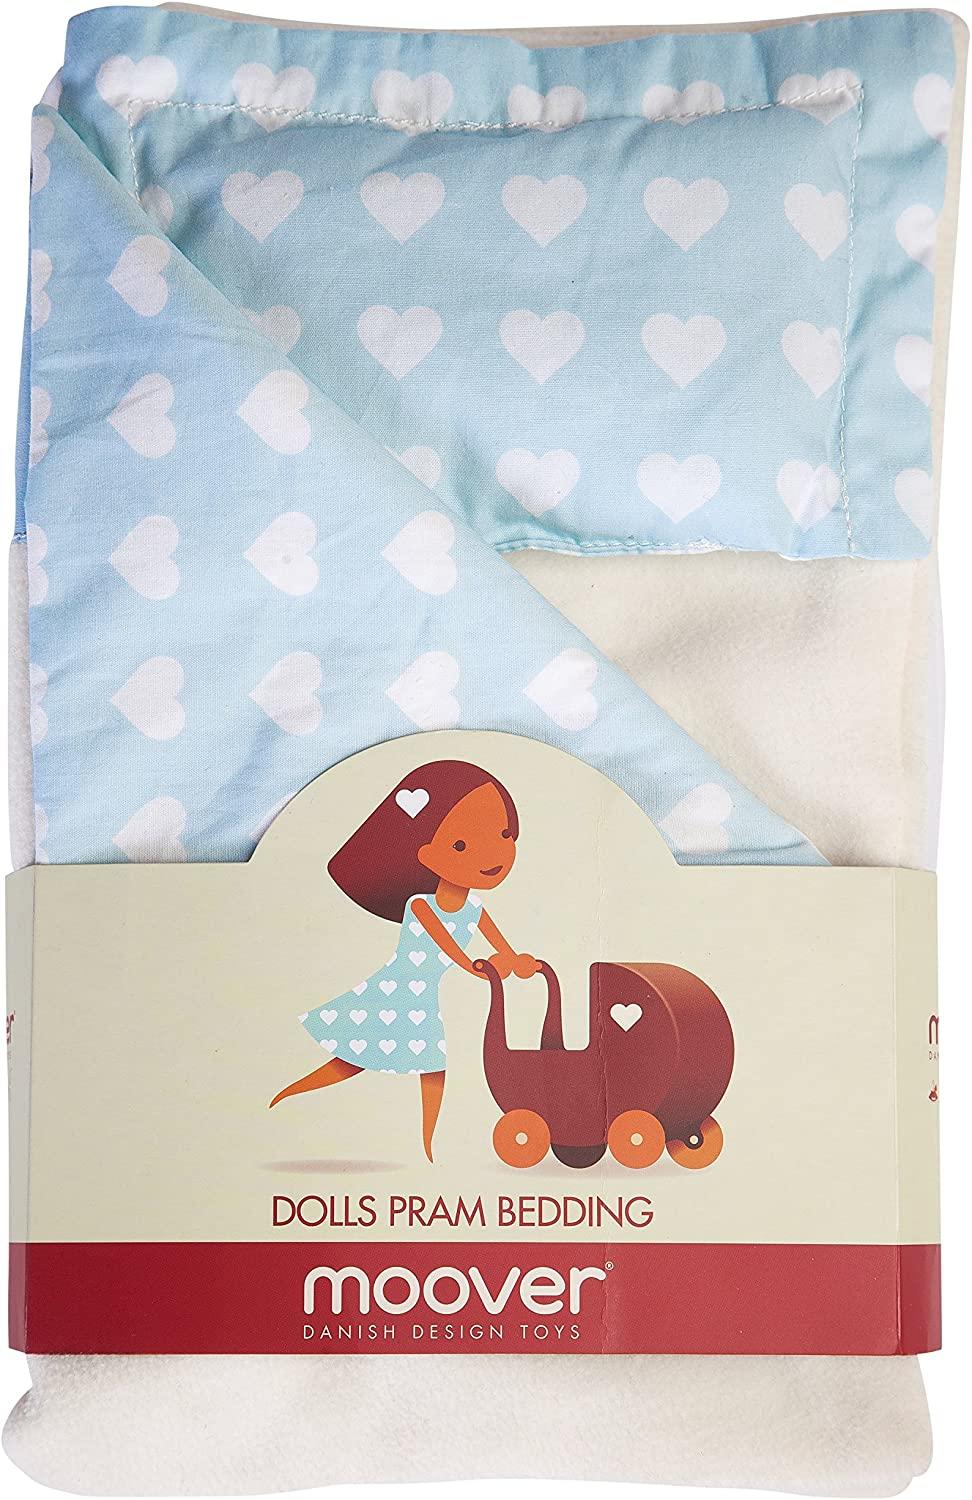 Image showing blue and white heart-patterned dolls pram bedding.